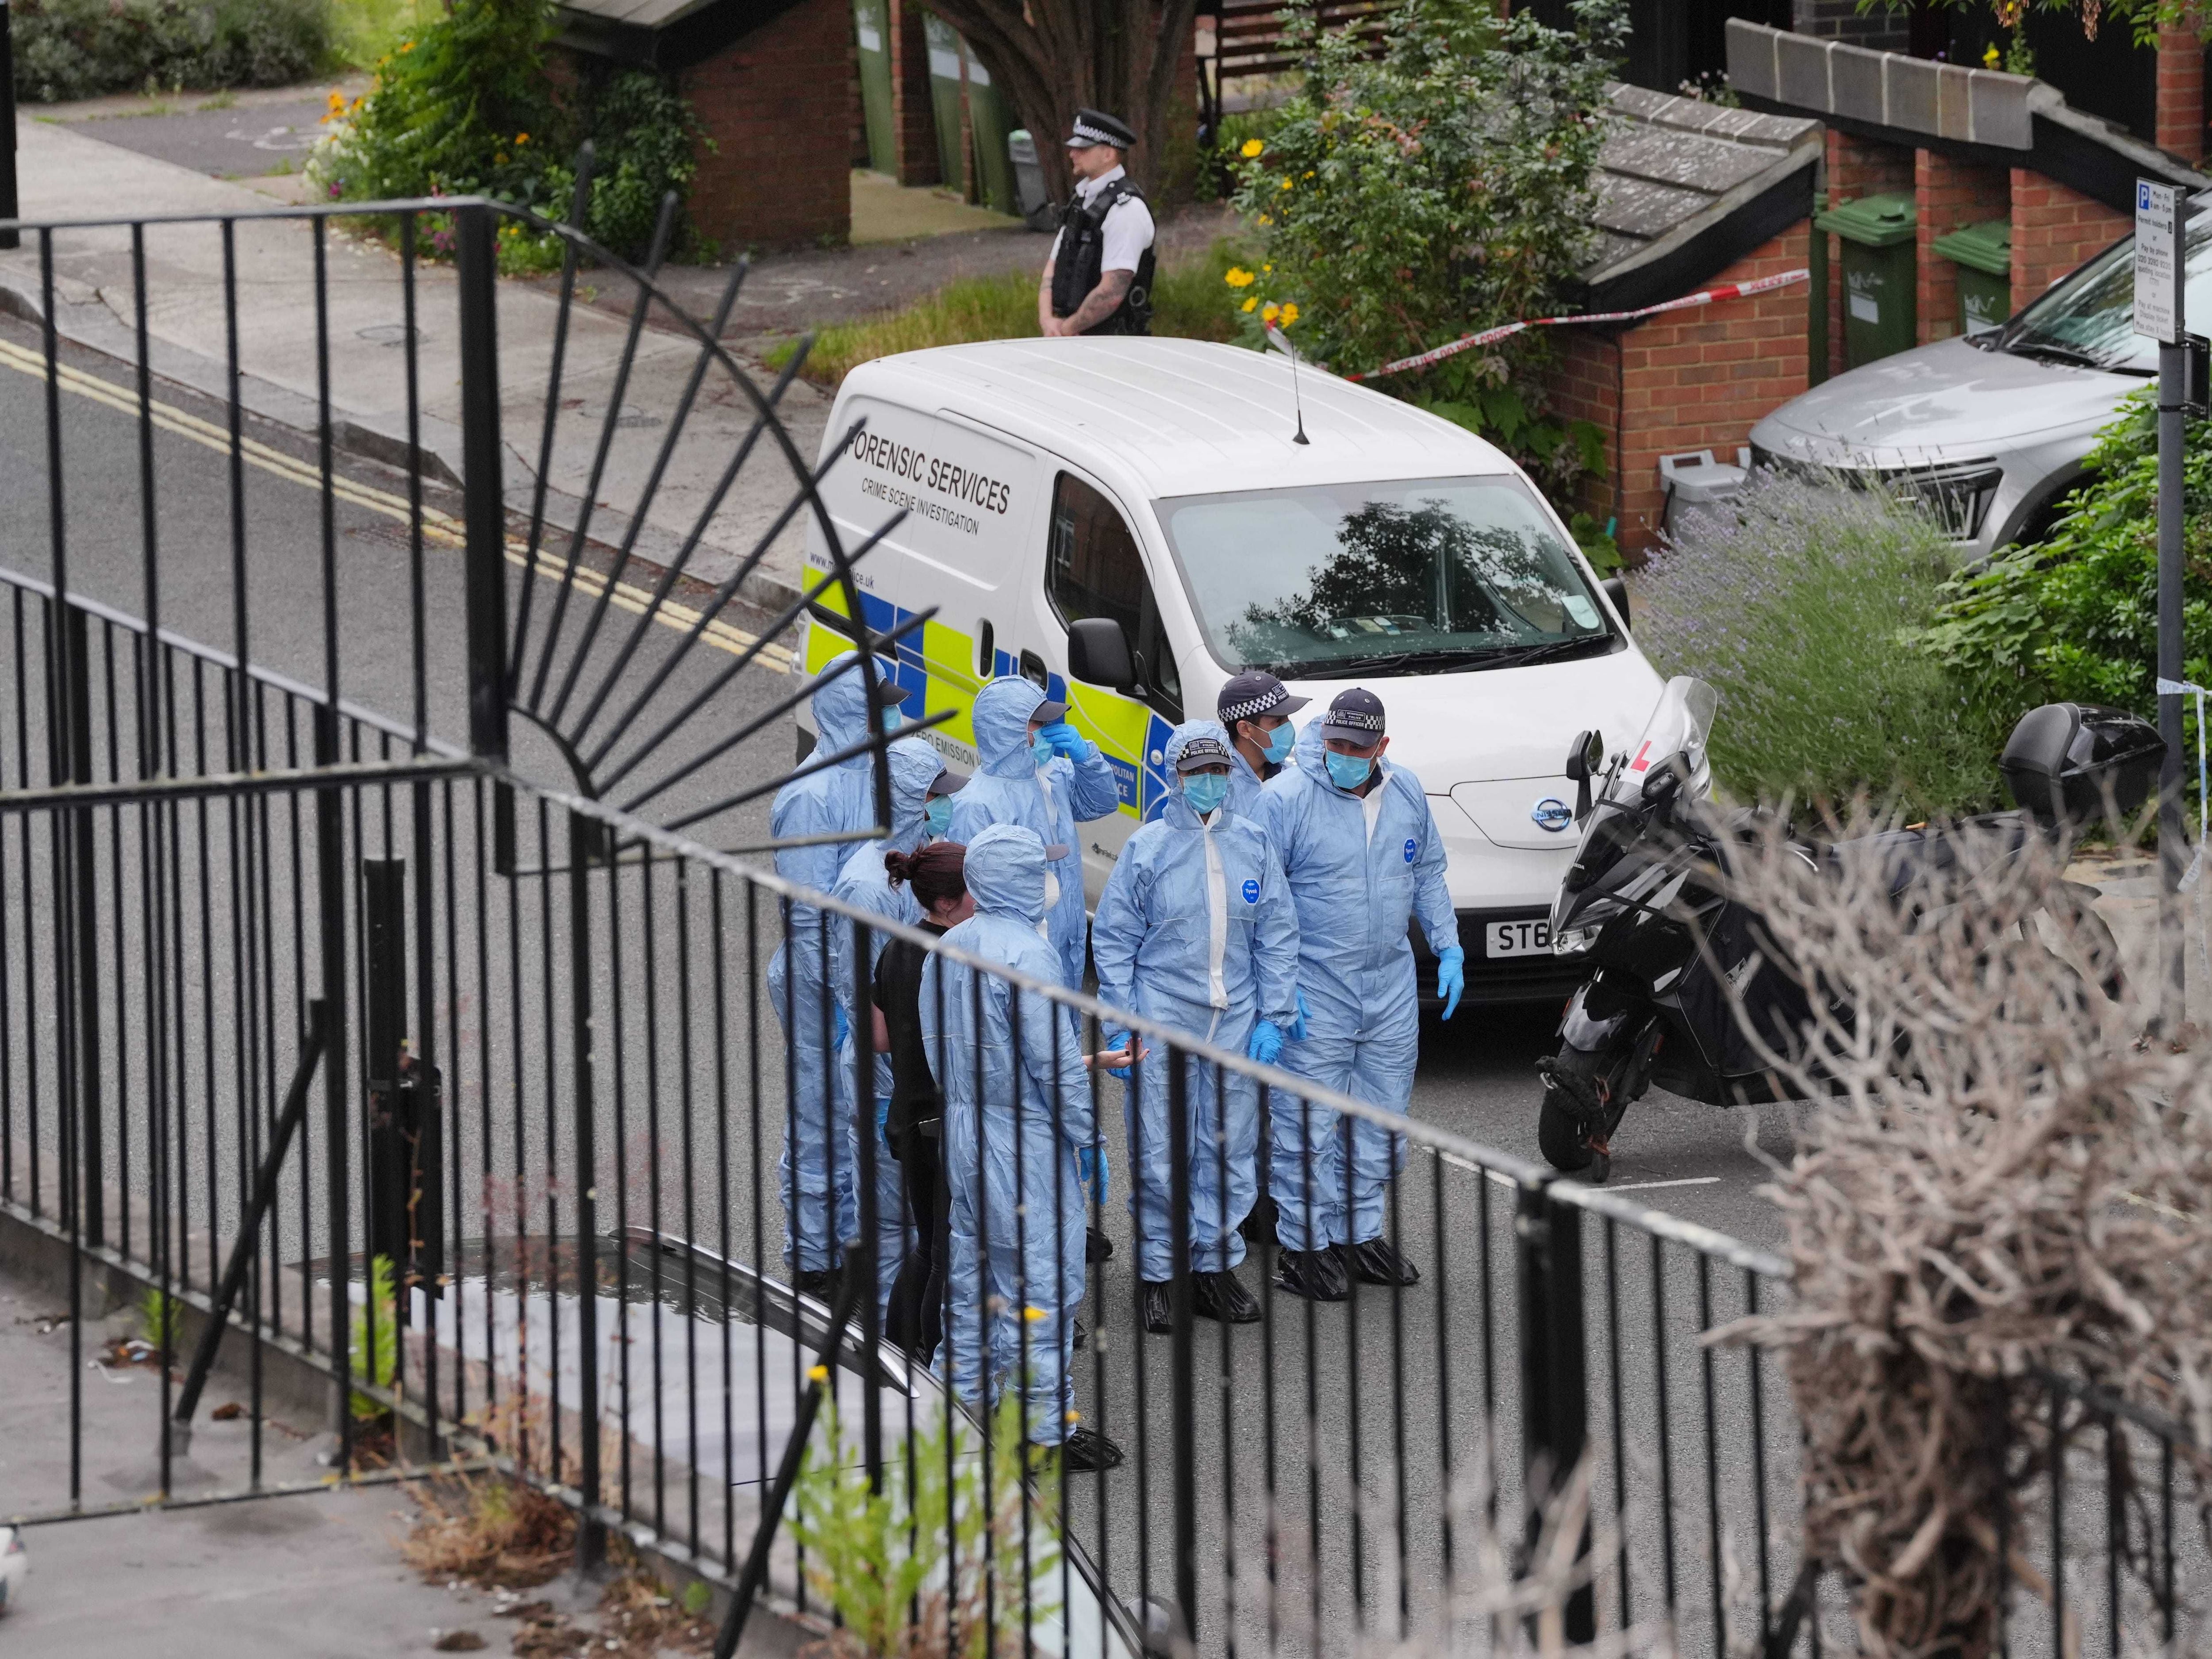 Man charged with murder over bodies found in suitcases in Bristol